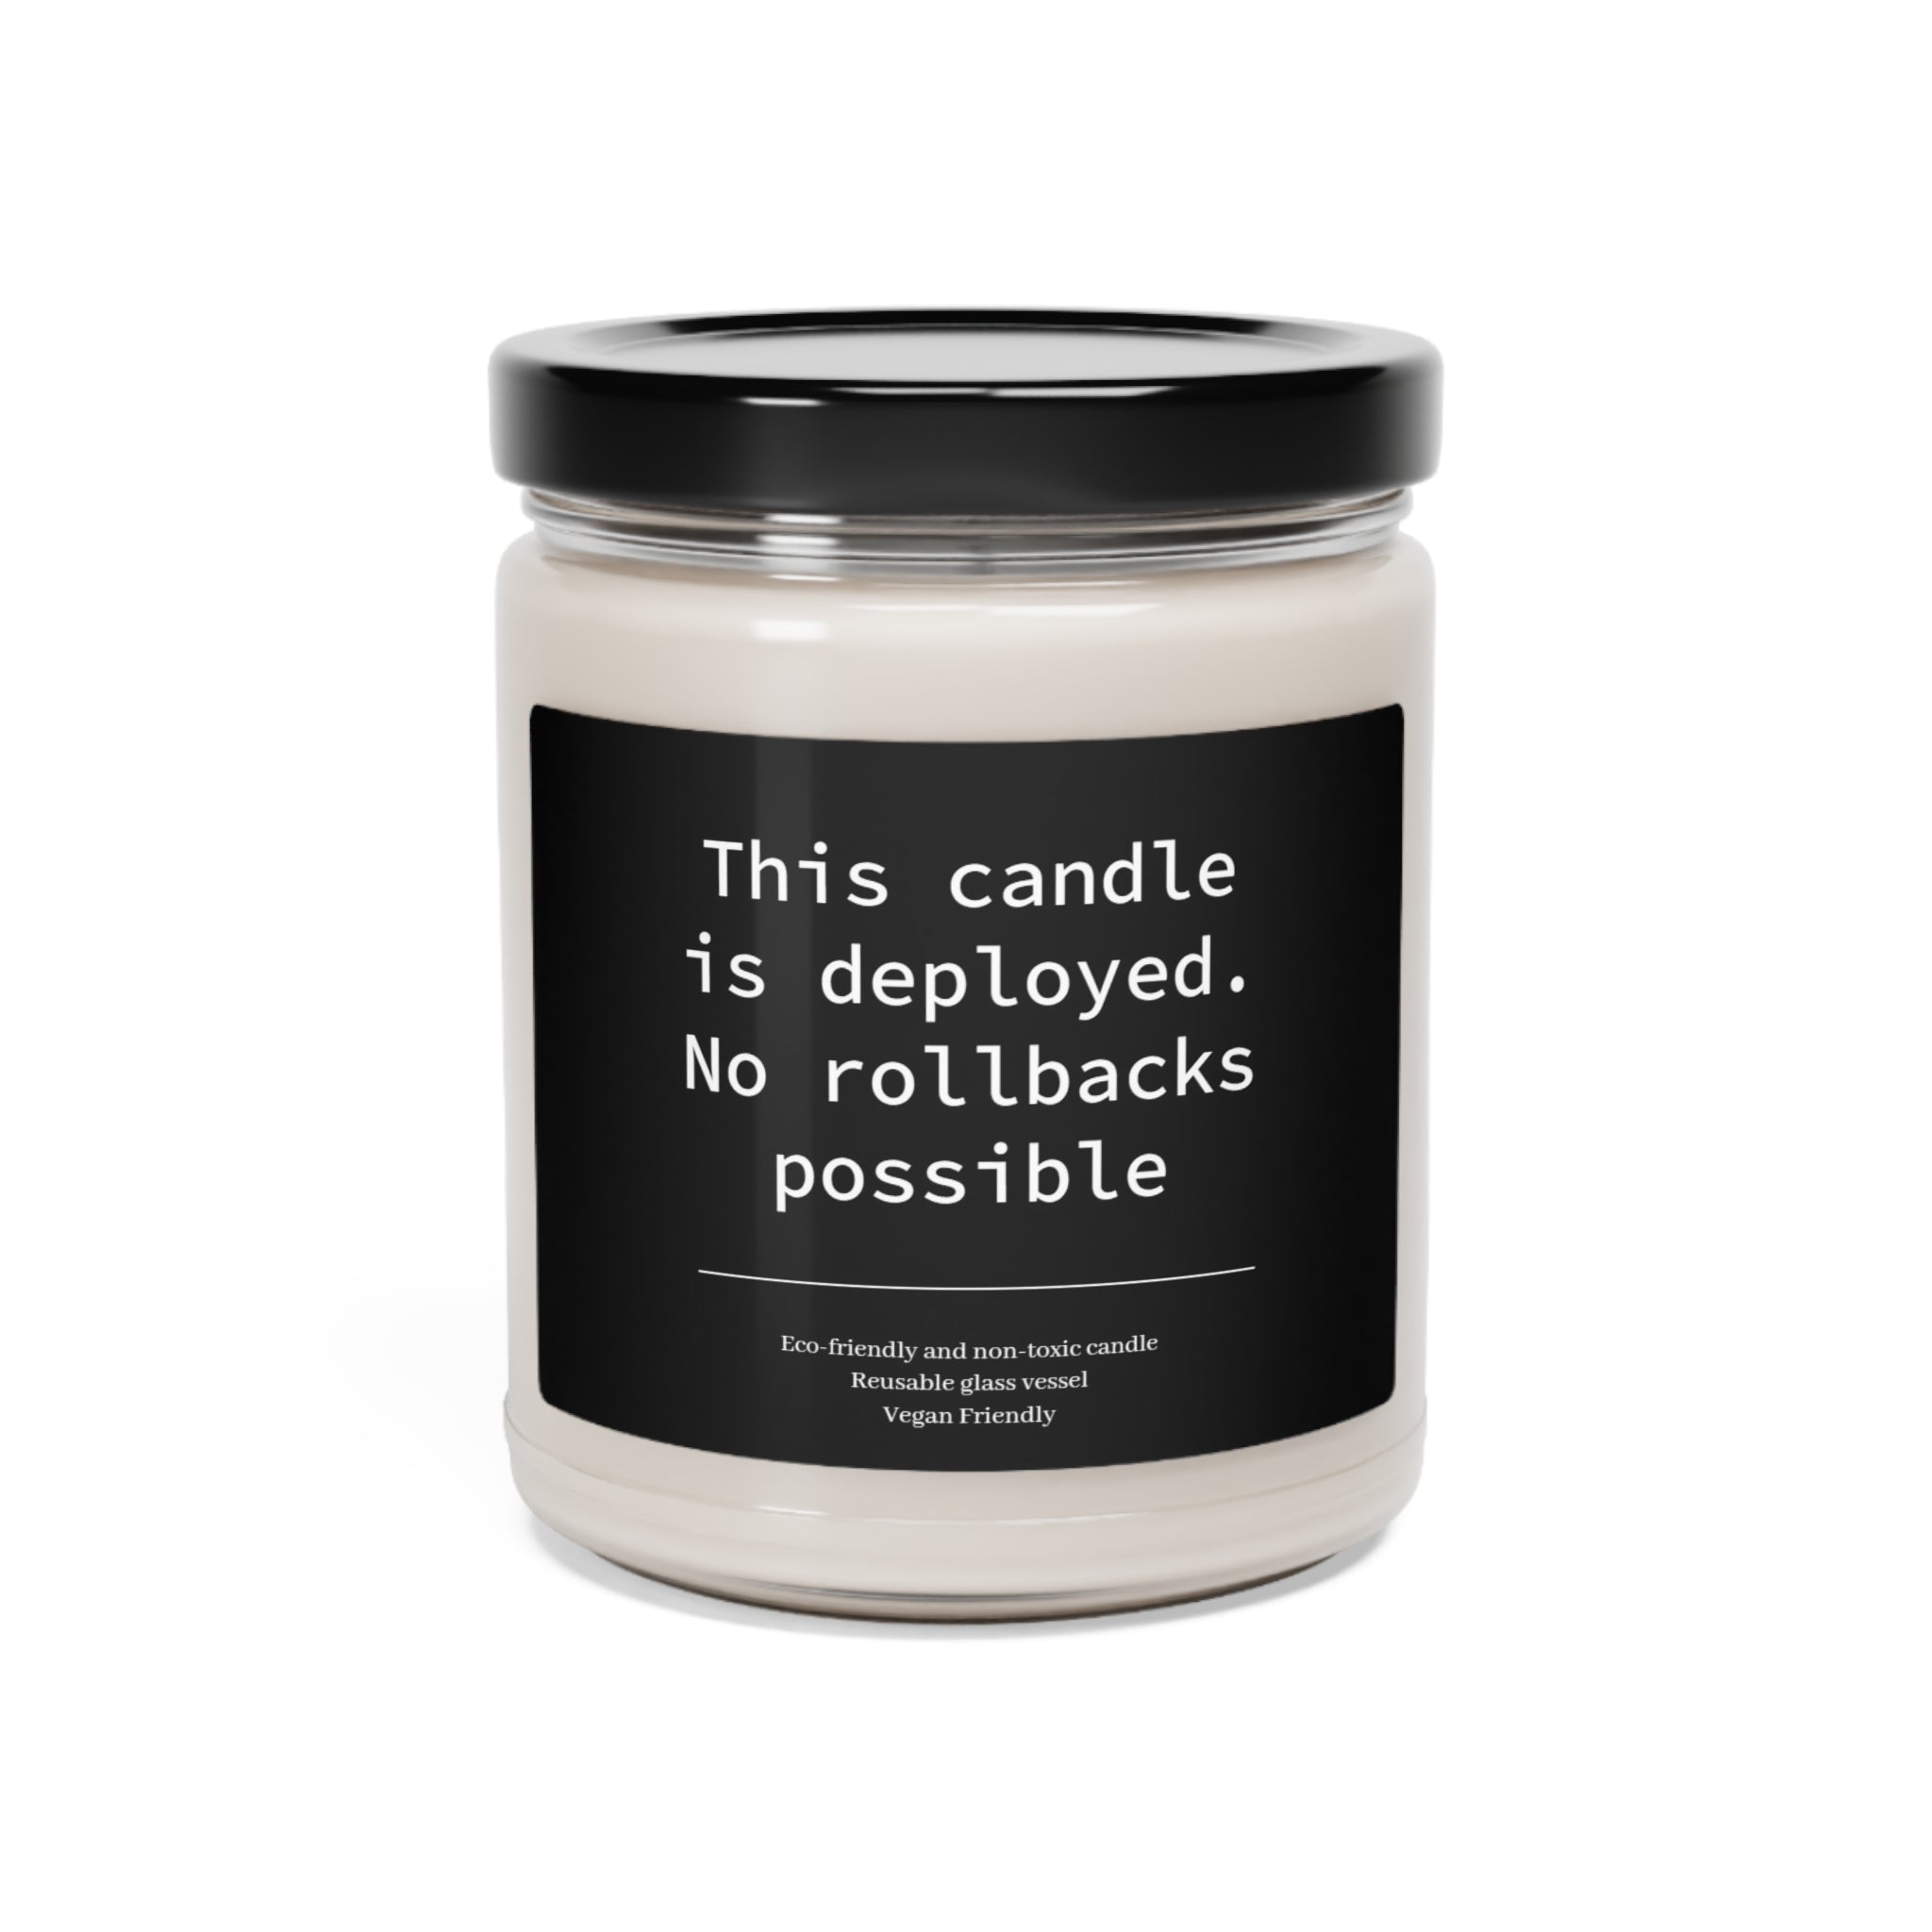 A This Candle Deployed - No Rollbacks- Scented Soy Candle, 9oz with a humorous label that reads "this candle is deployed. no rollbacks possible," featuring a natural soy wax blend.